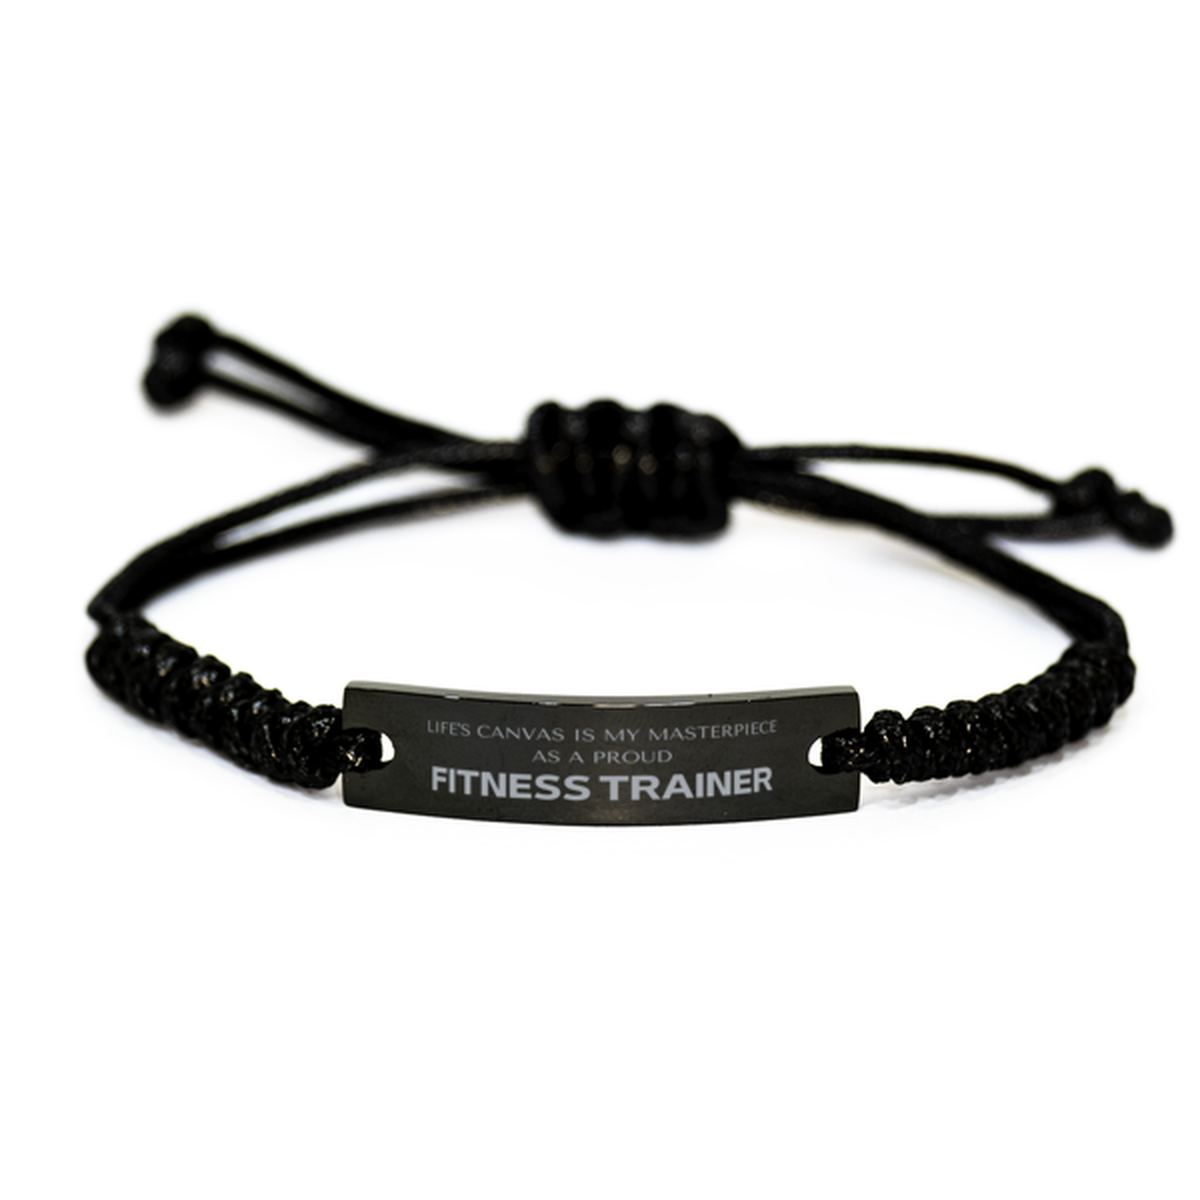 Proud Fitness Trainer Gifts, Life's canvas is my masterpiece, Epic Birthday Christmas Unique Black Rope Bracelet For Fitness Trainer, Coworkers, Men, Women, Friends